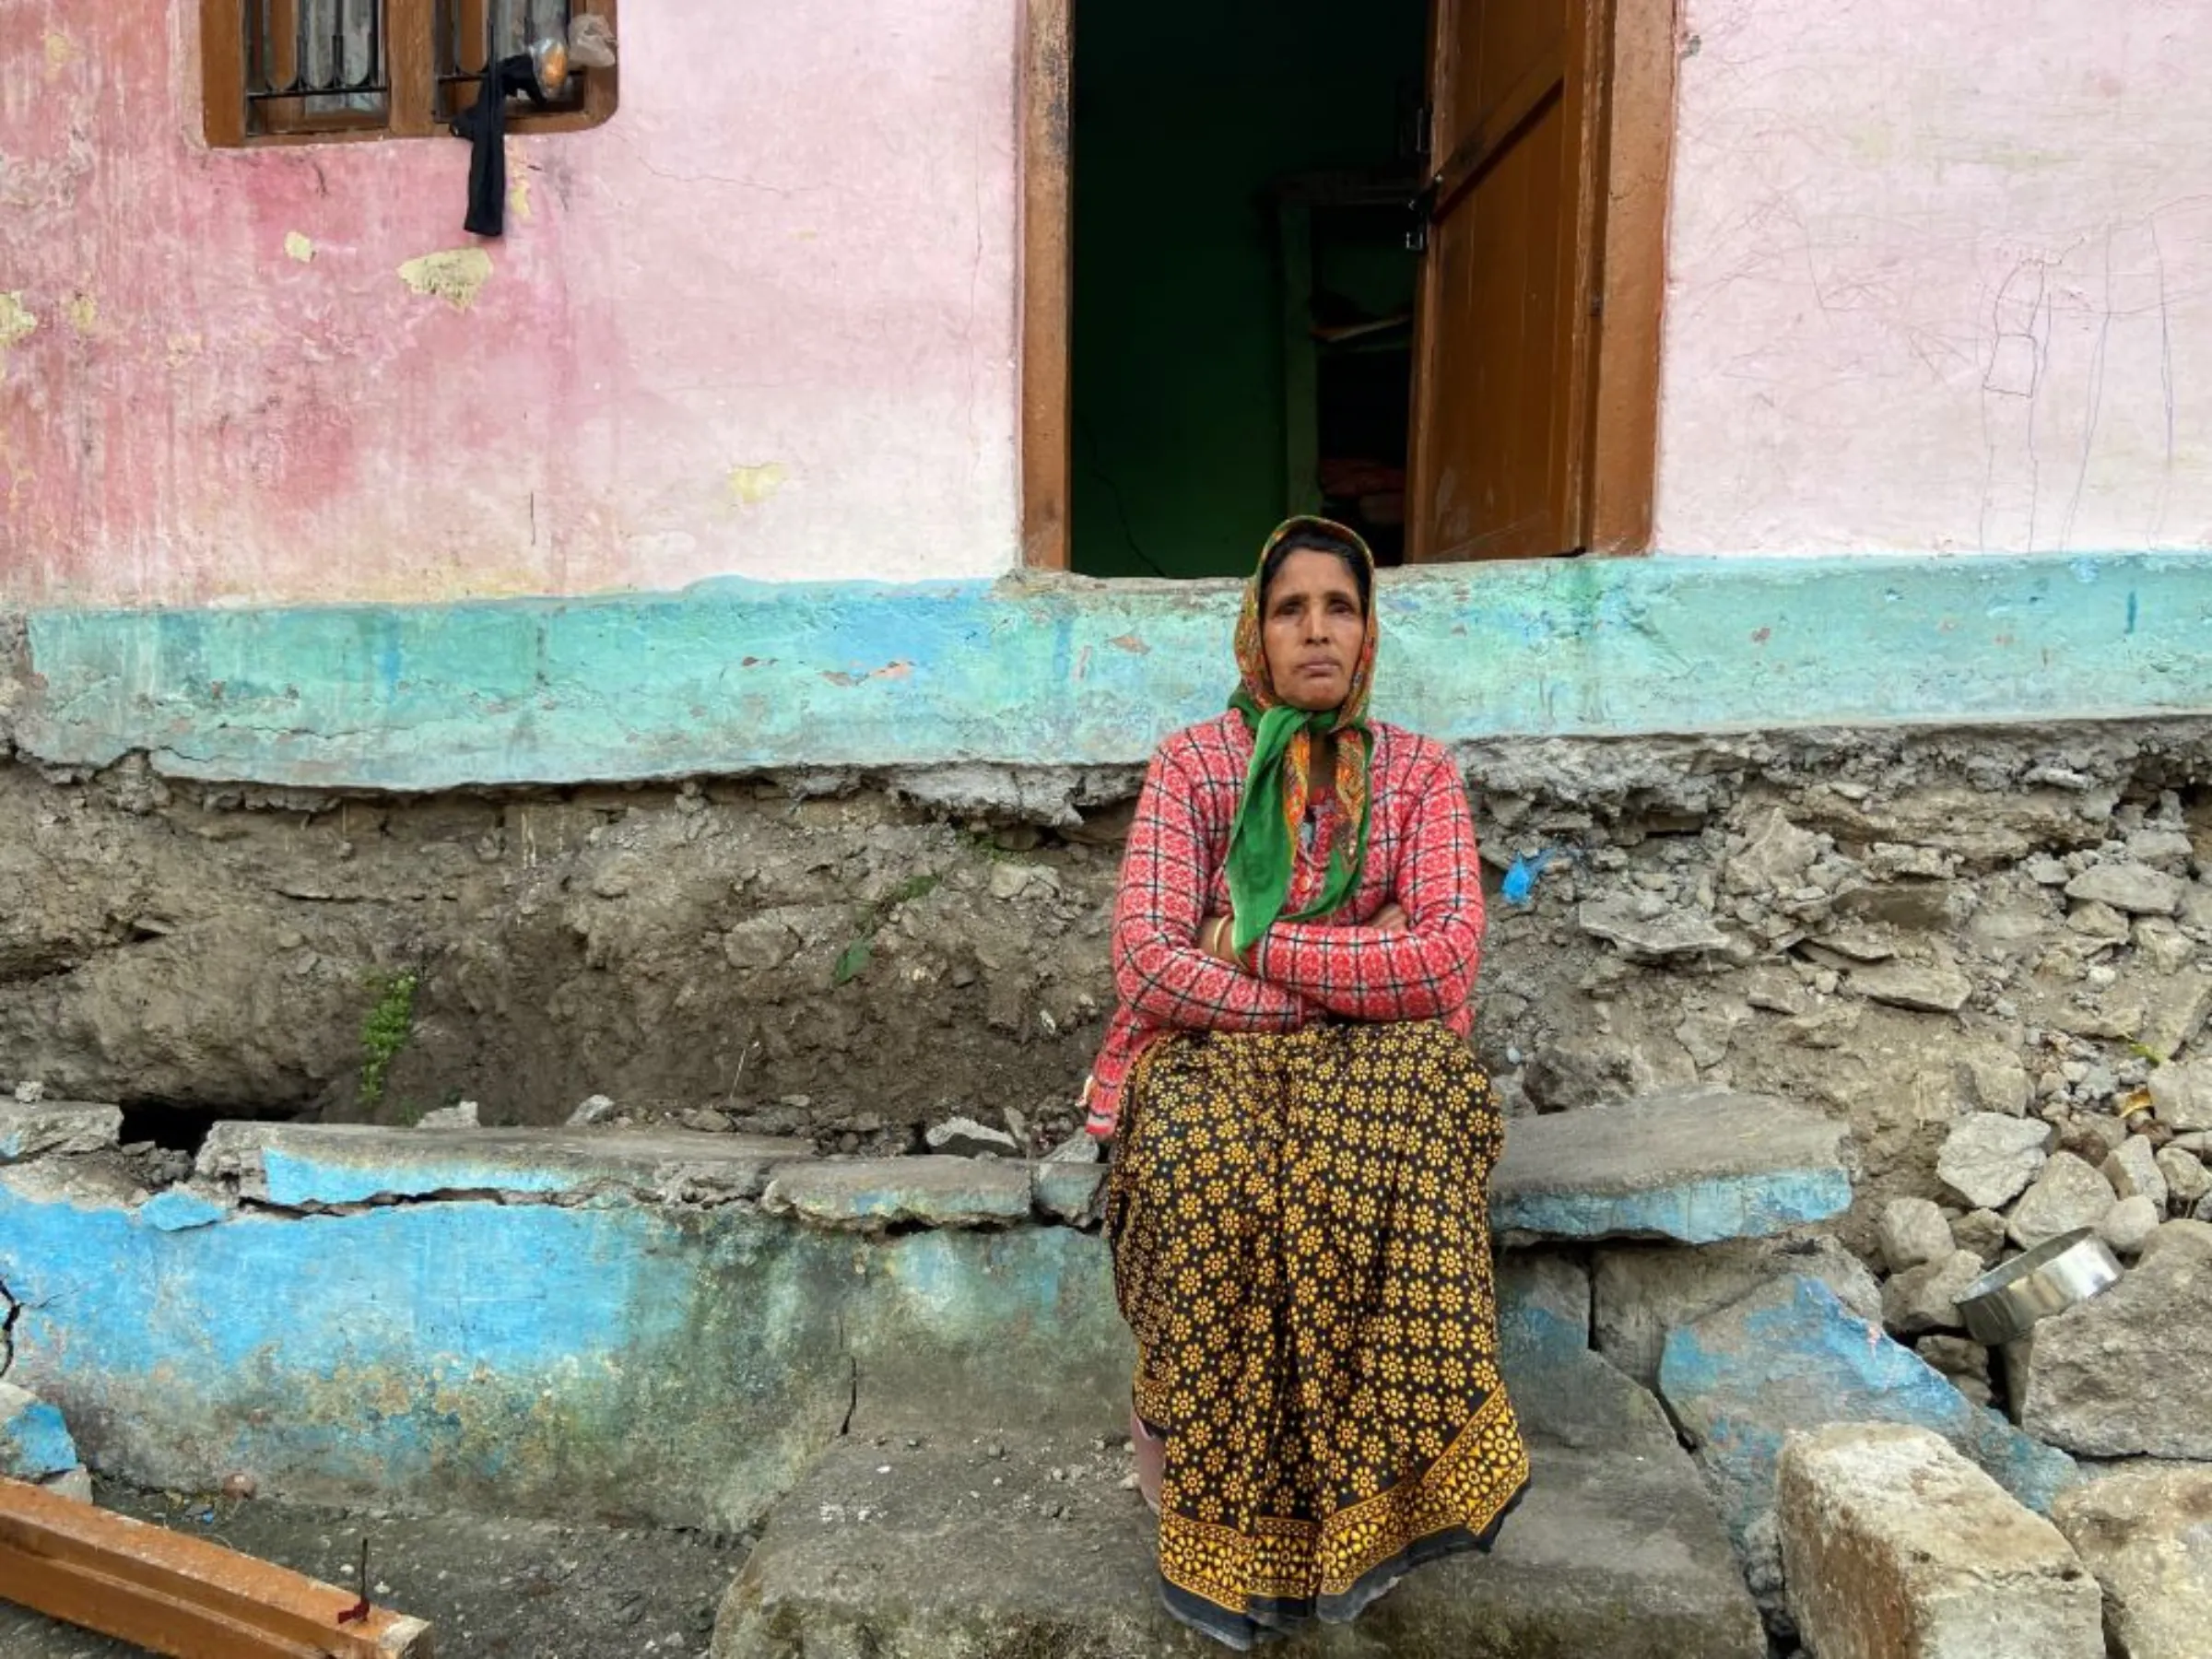 Farmer Rishi Devi sits outside her house that she evacuated in early January when massive cracks detached the house from its foundation in the Himalayan town of Joshimath, India, January 12, 2023